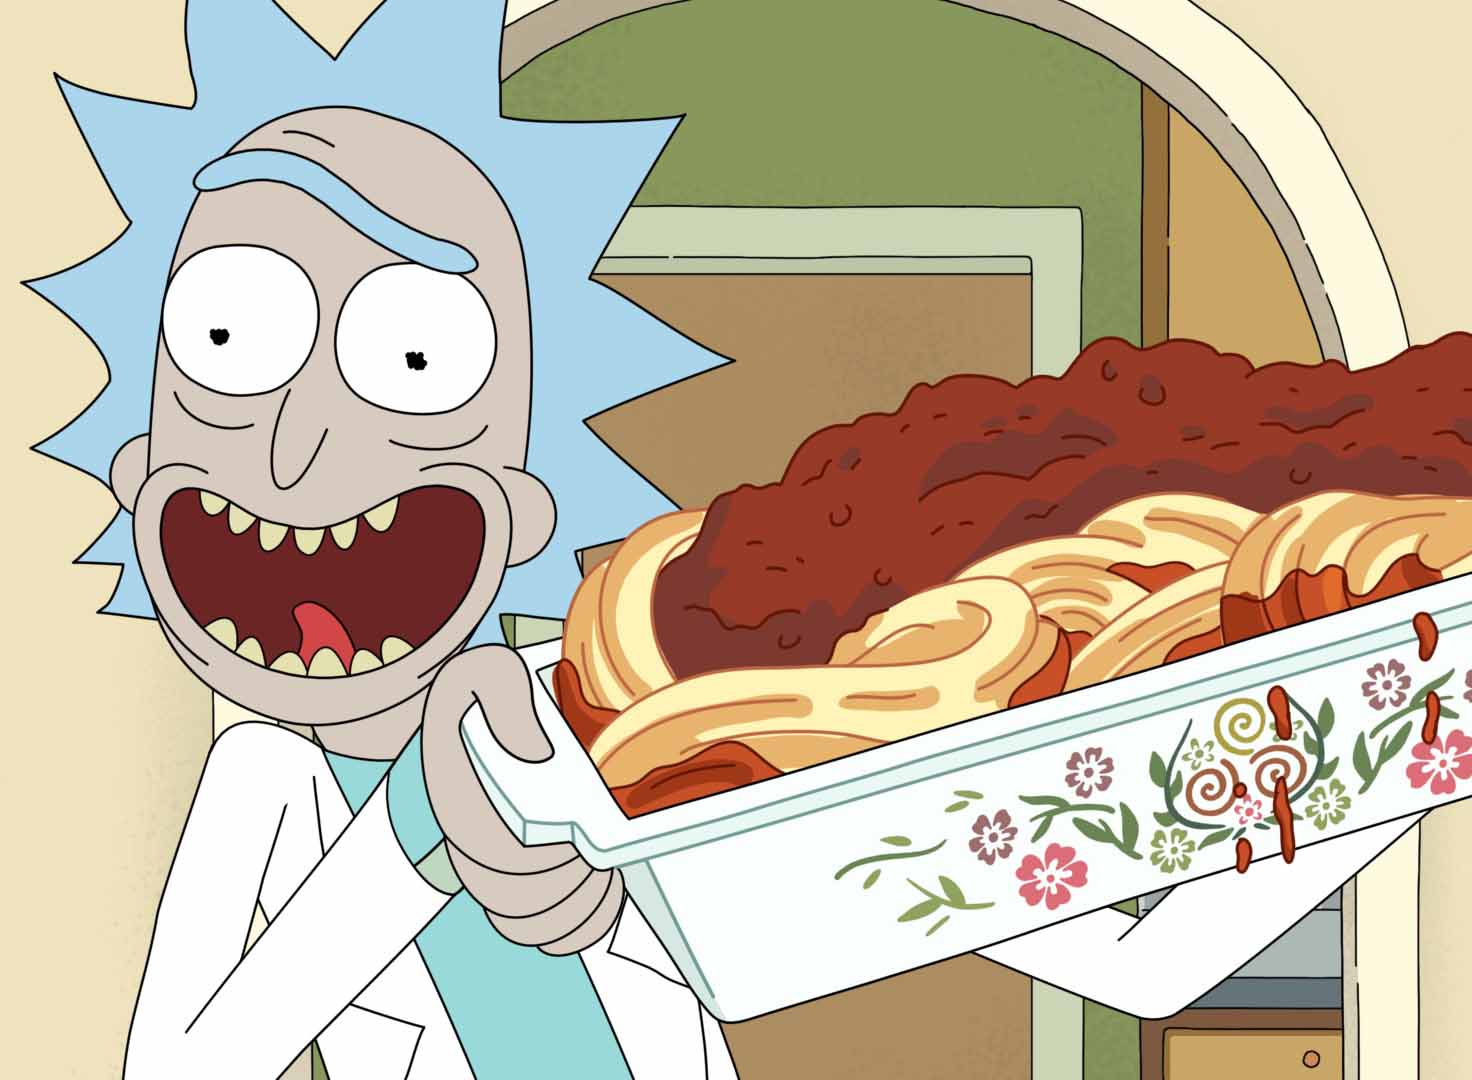 How to watch Rick and Morty Season 7 in the US on Channel 4 for